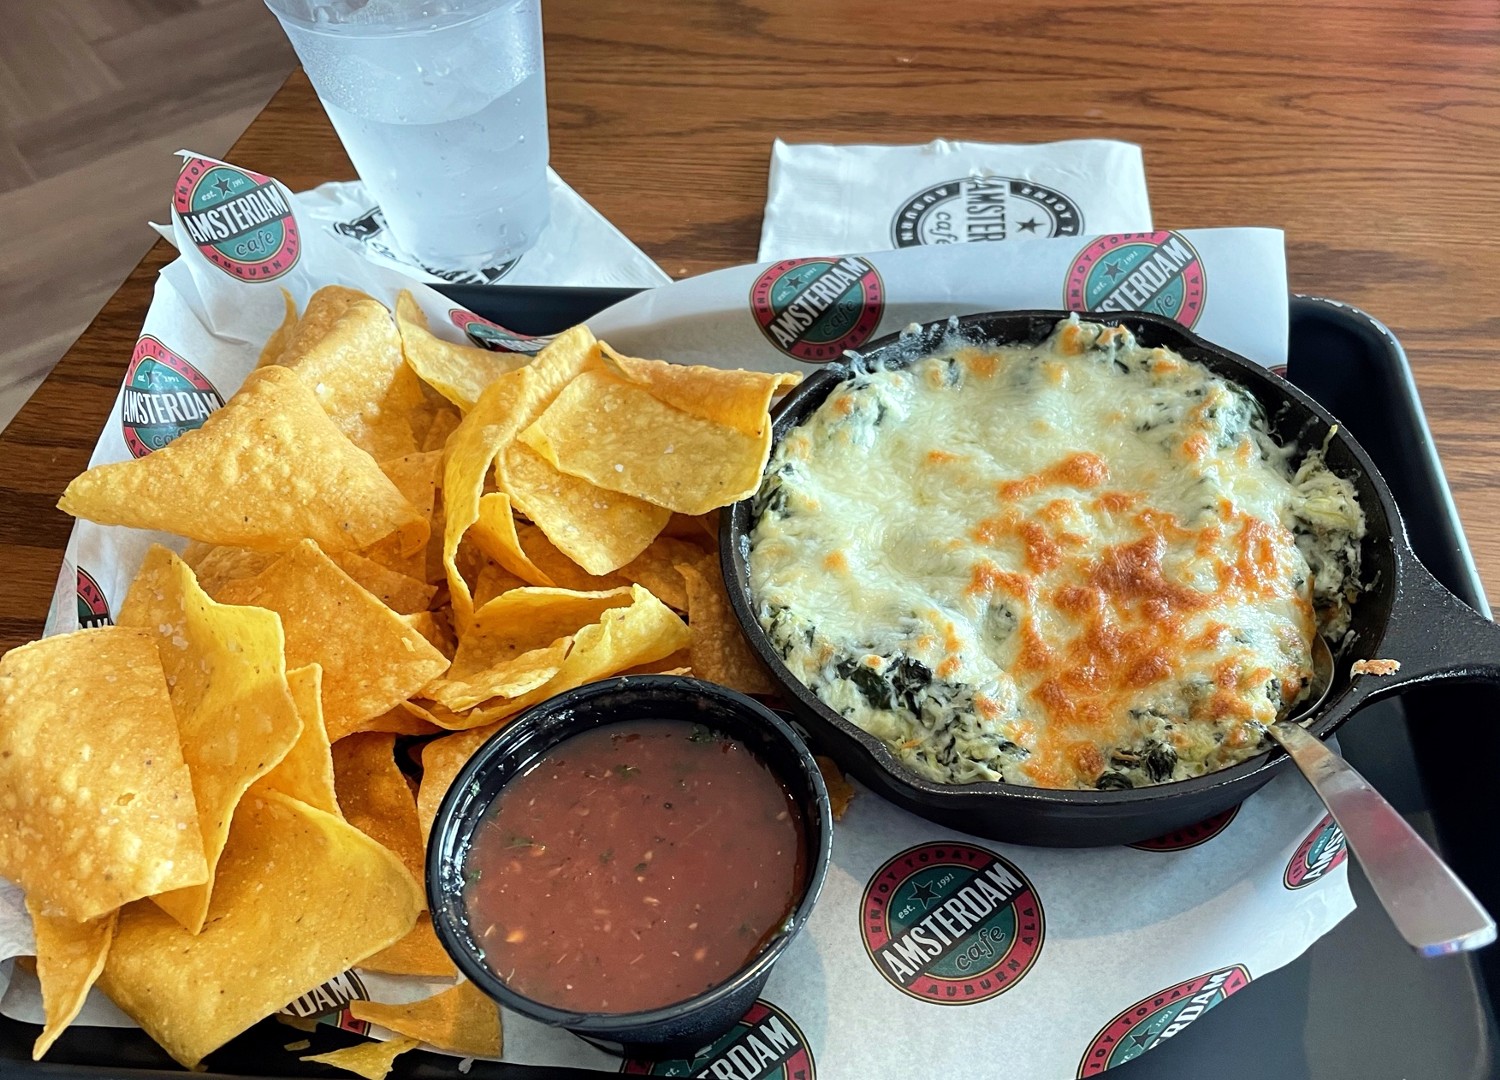 Spinach and artichoke dip with housemade salsa and corn tortilla chips is one of the appetizers offered at Amsterdam Cafe North.